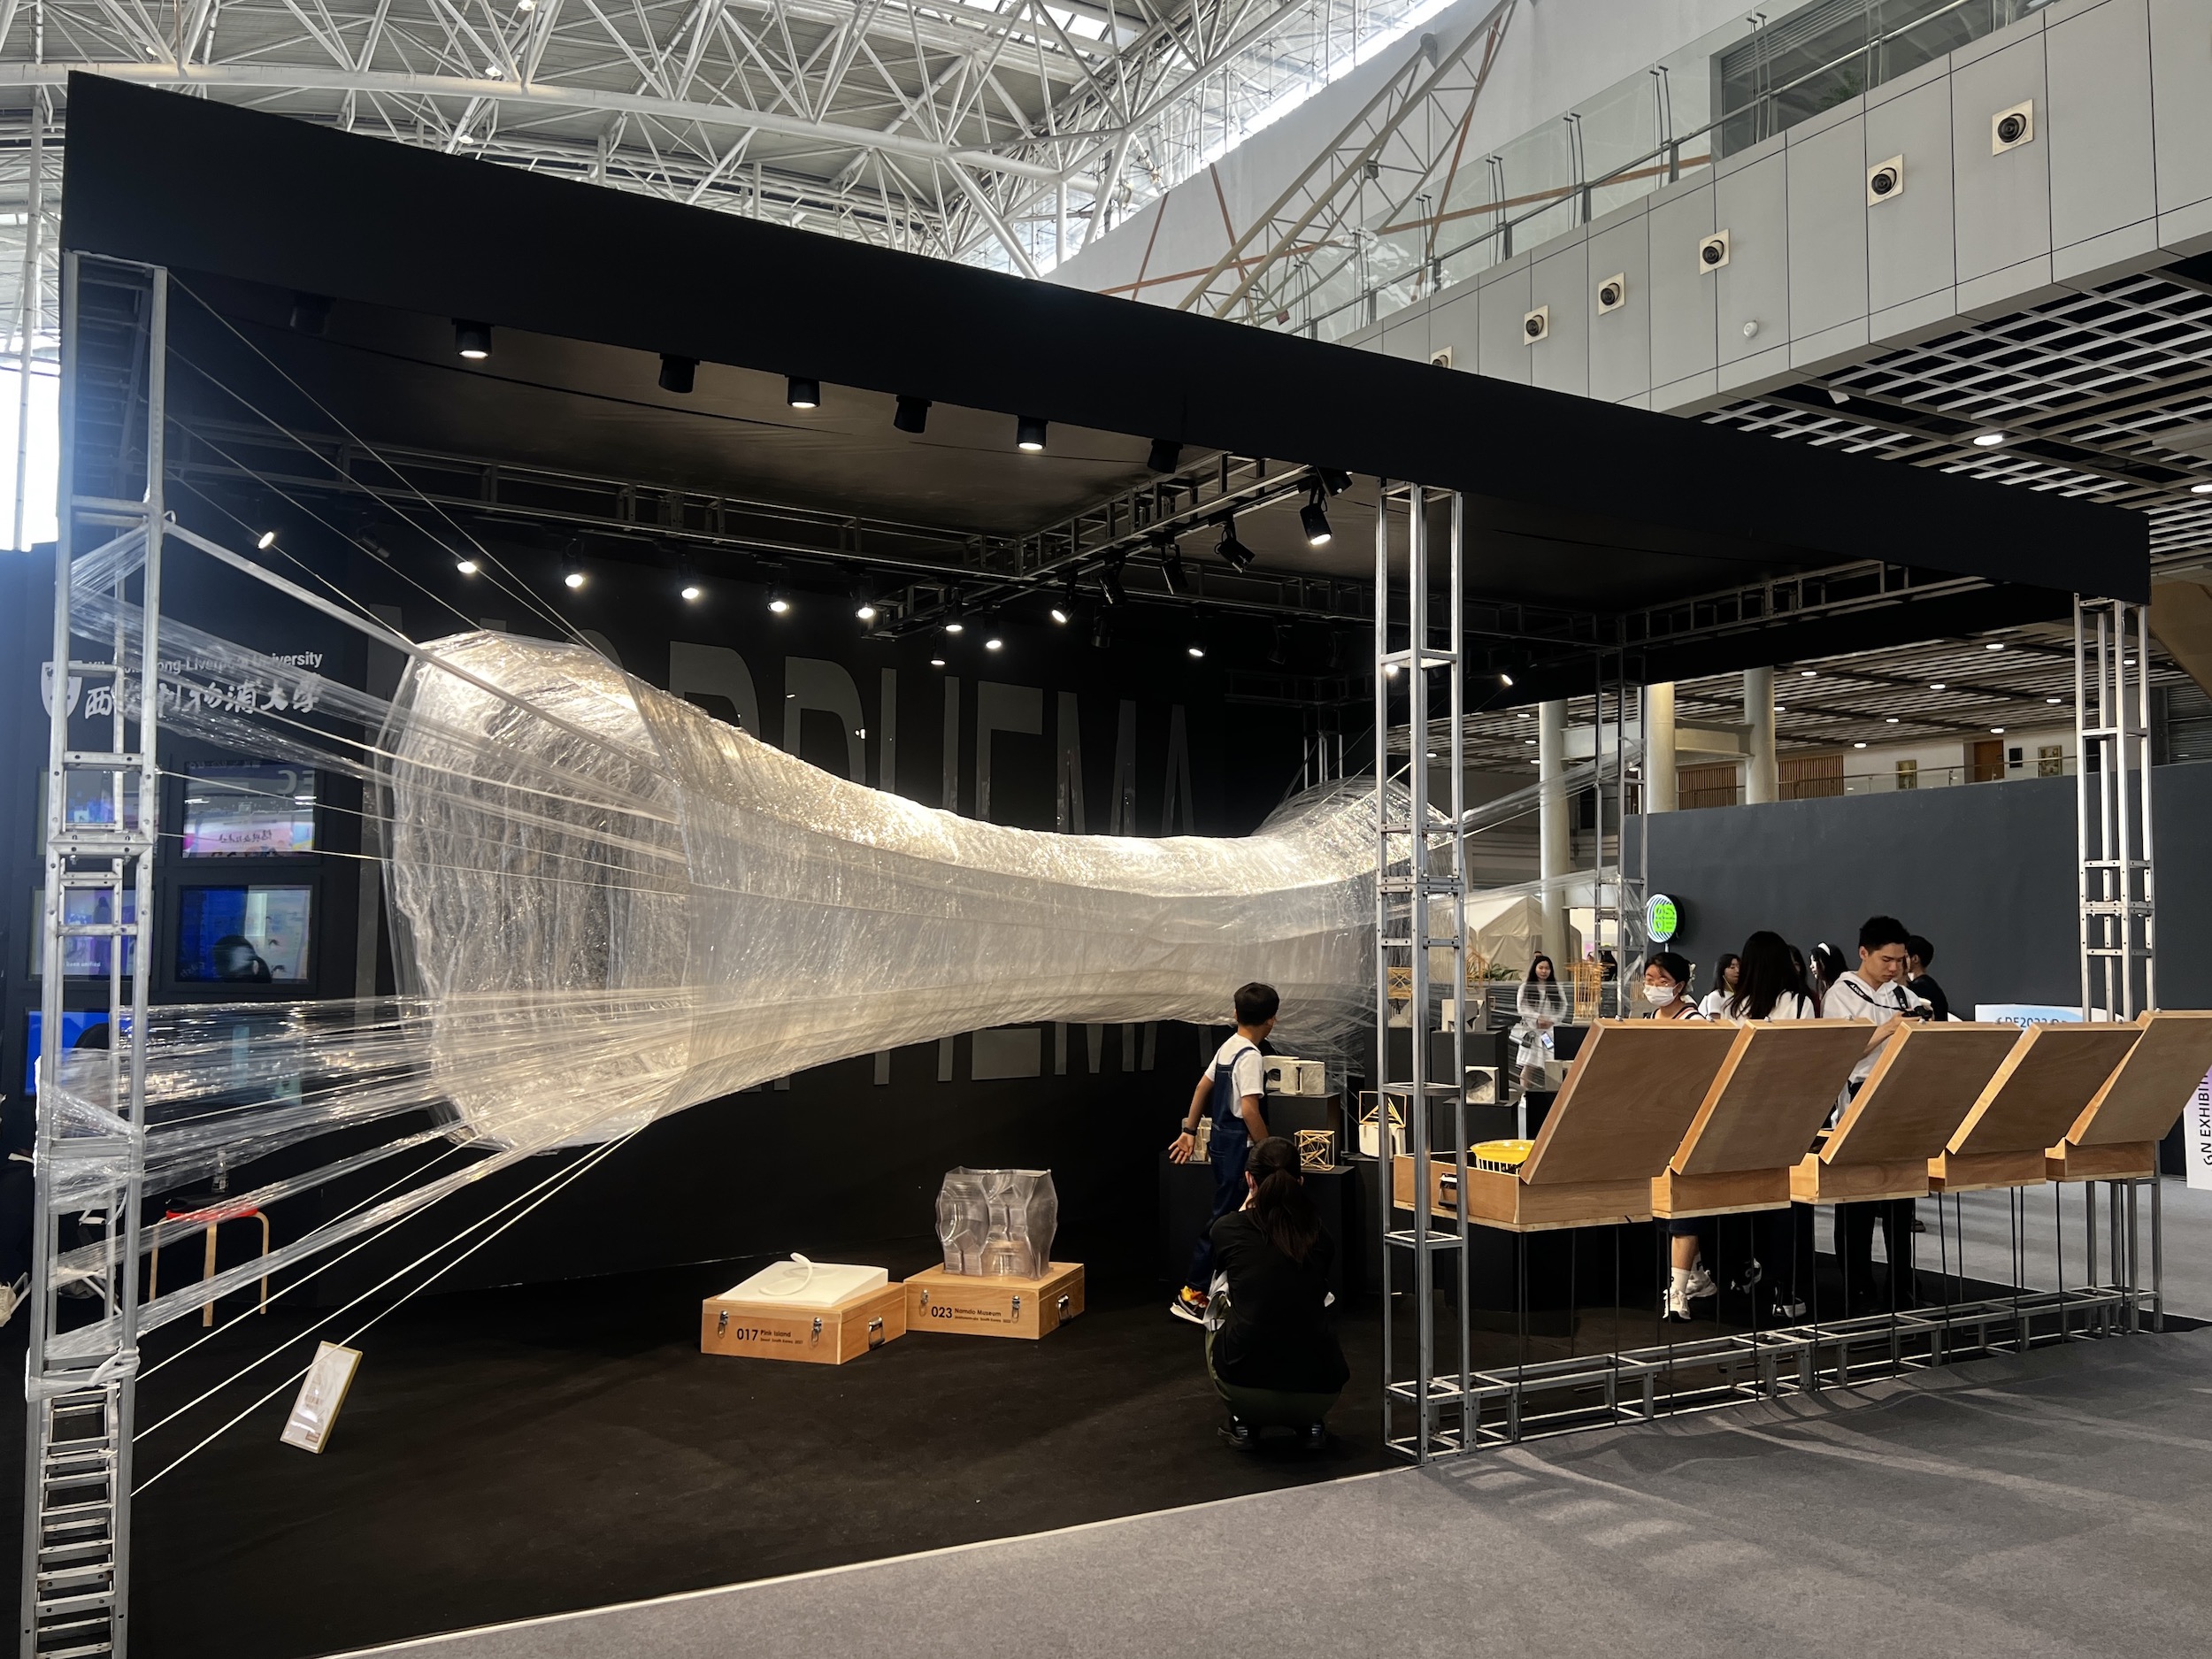 XJTLU’s unique design attracts visitors and wins first prize